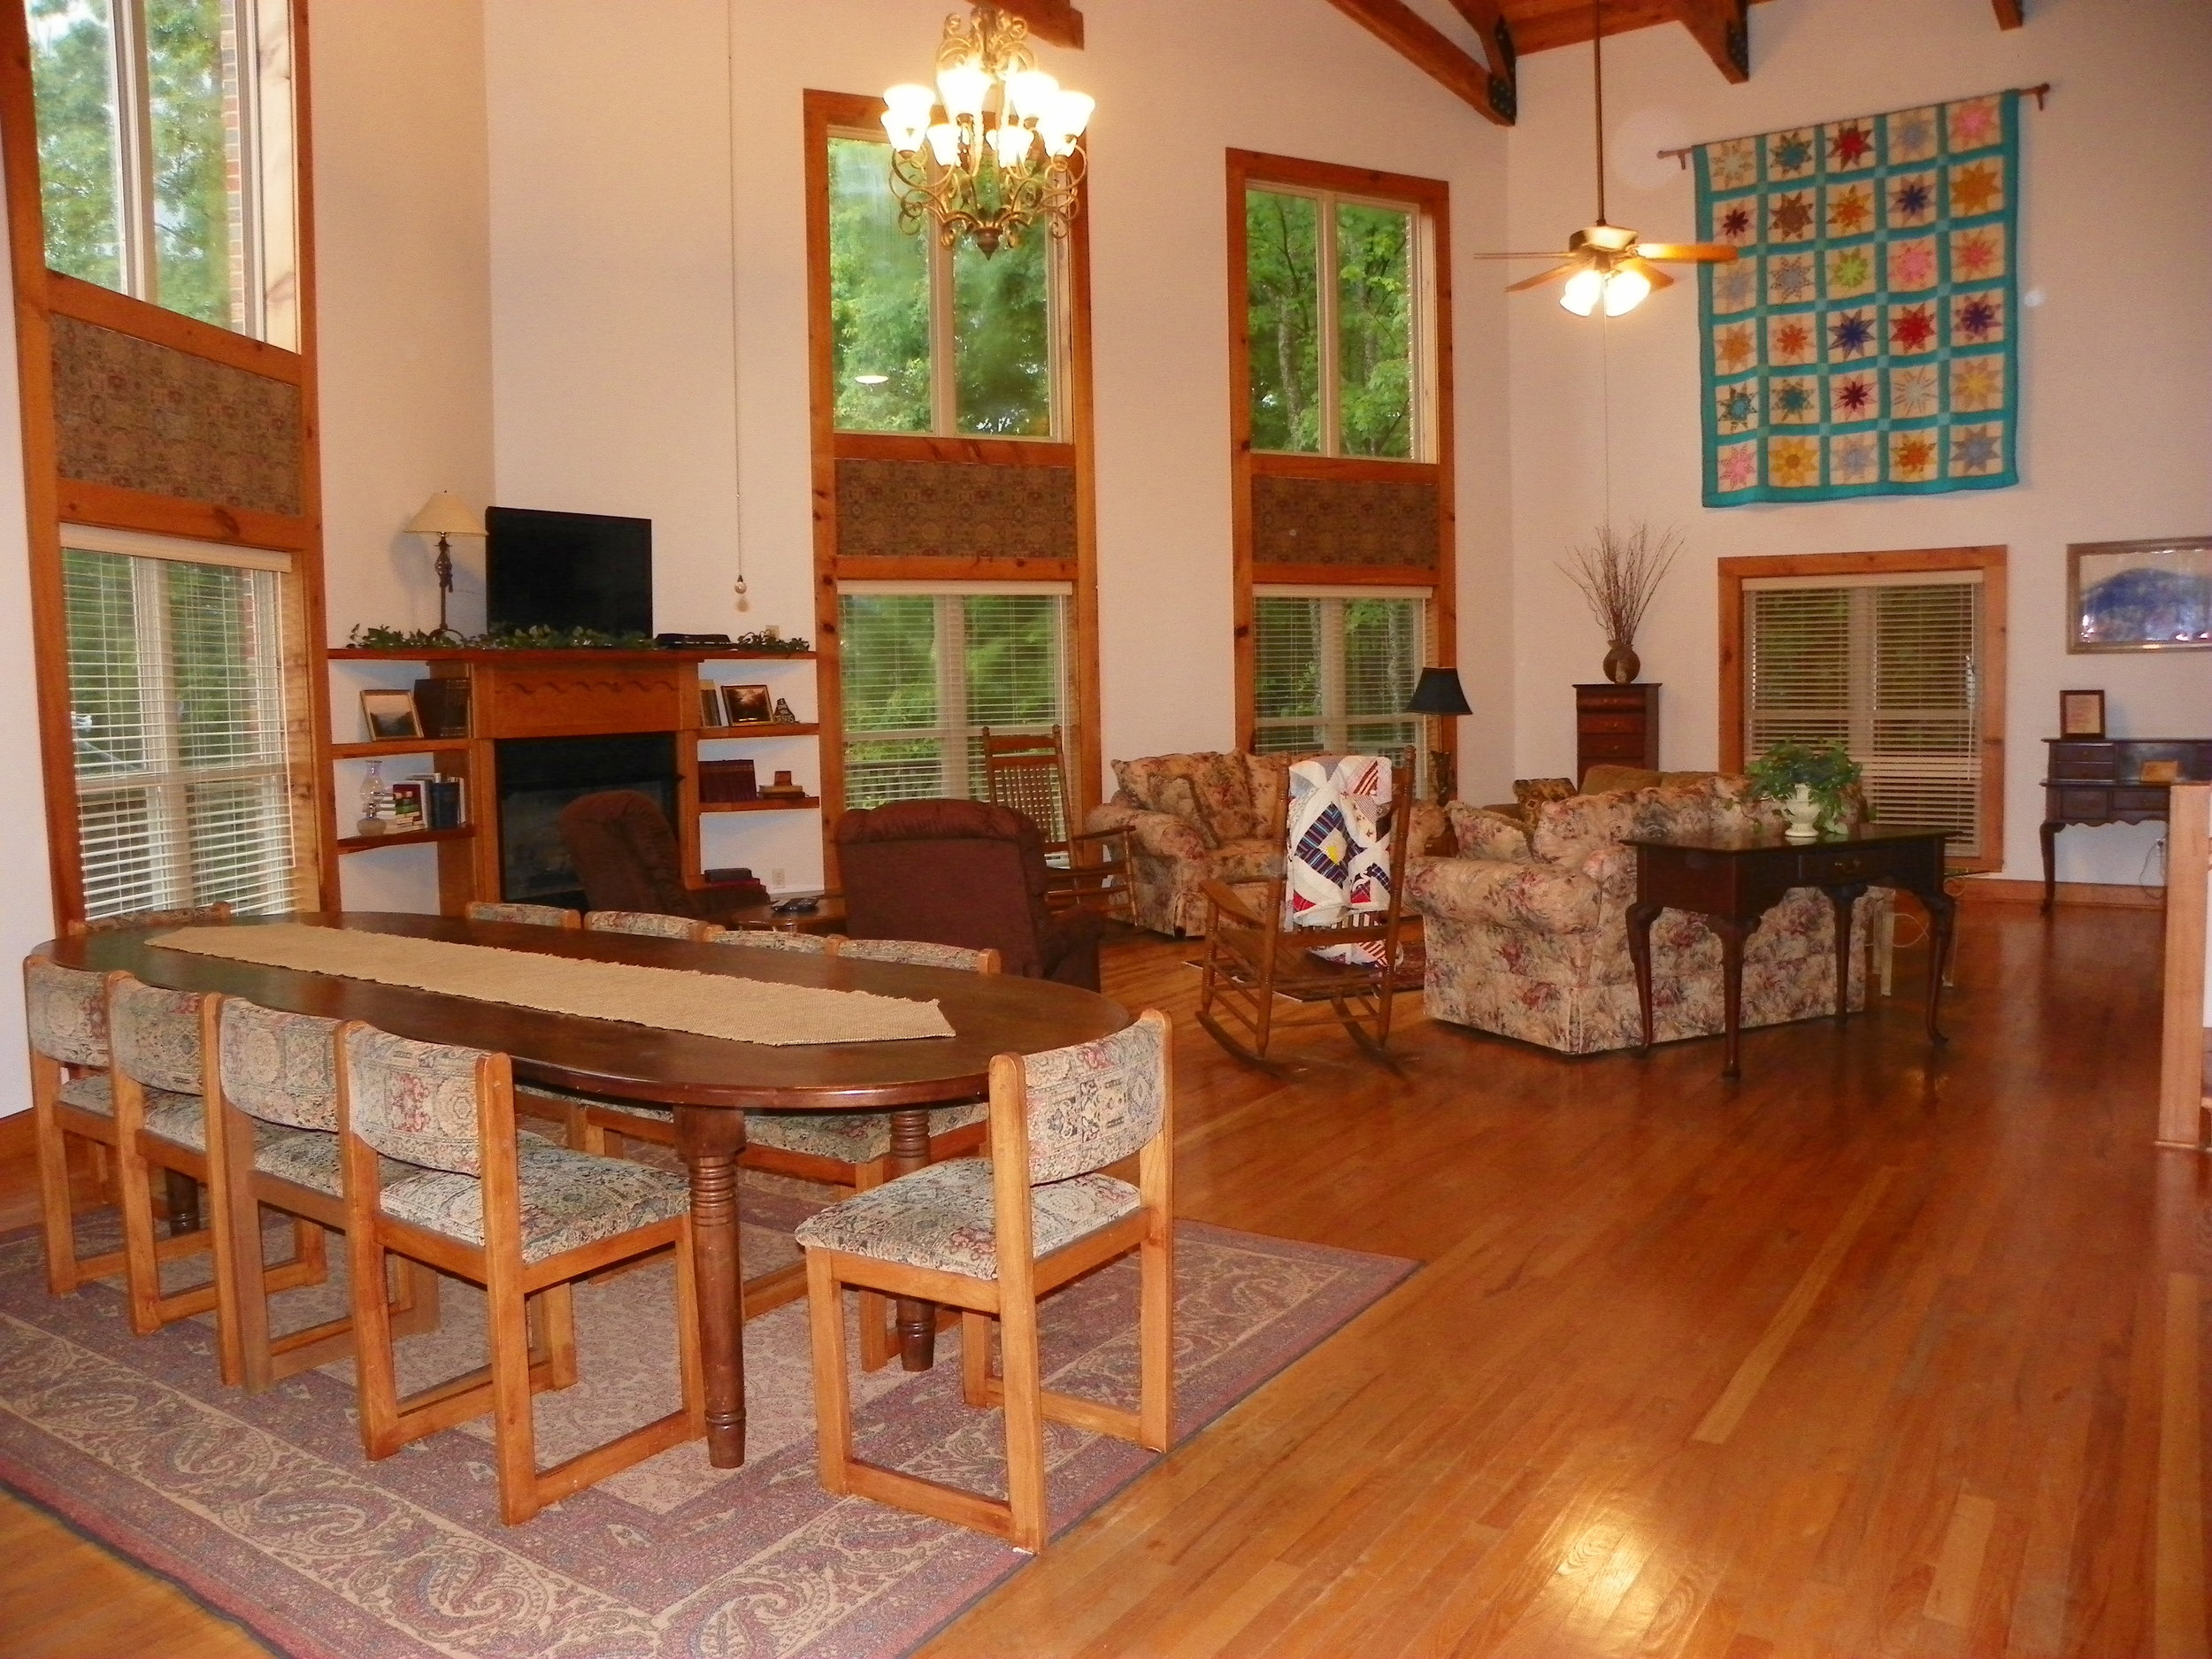 Family-friendly living room at Pointe View Lodge